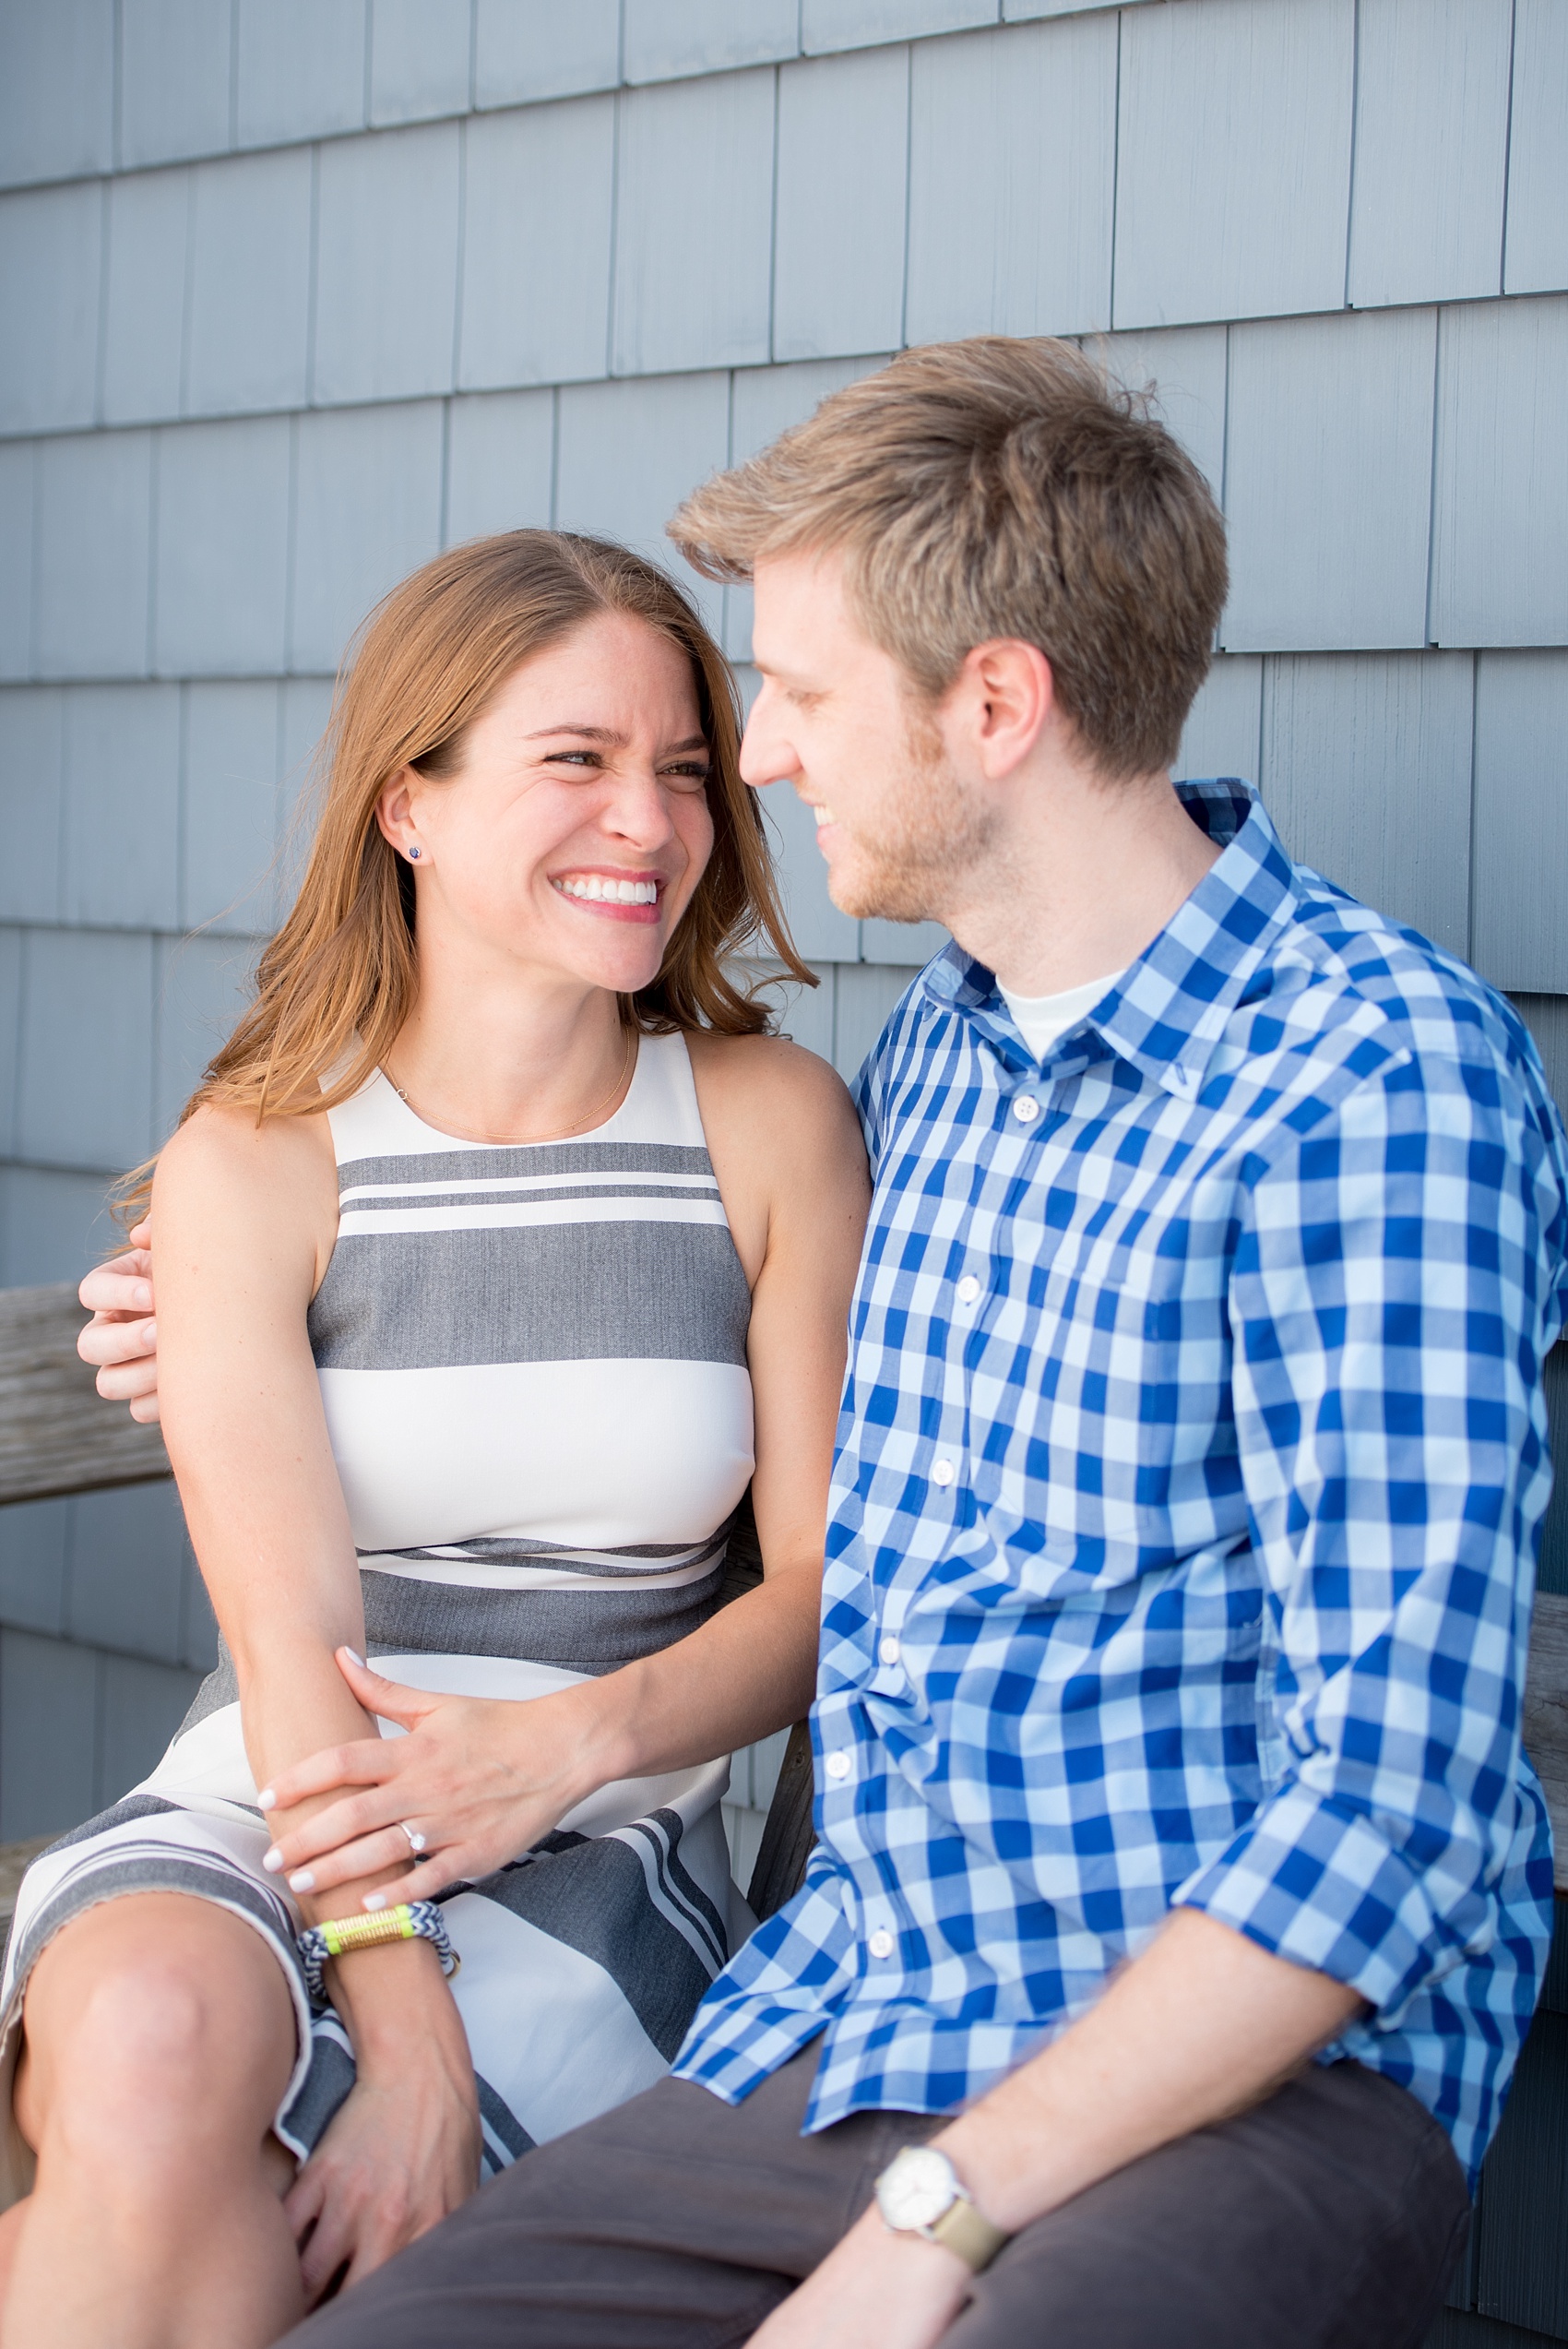 Mikkel Paige Photography captures a Bay Head, NJ engagement session with the village shops and colorful buildings.